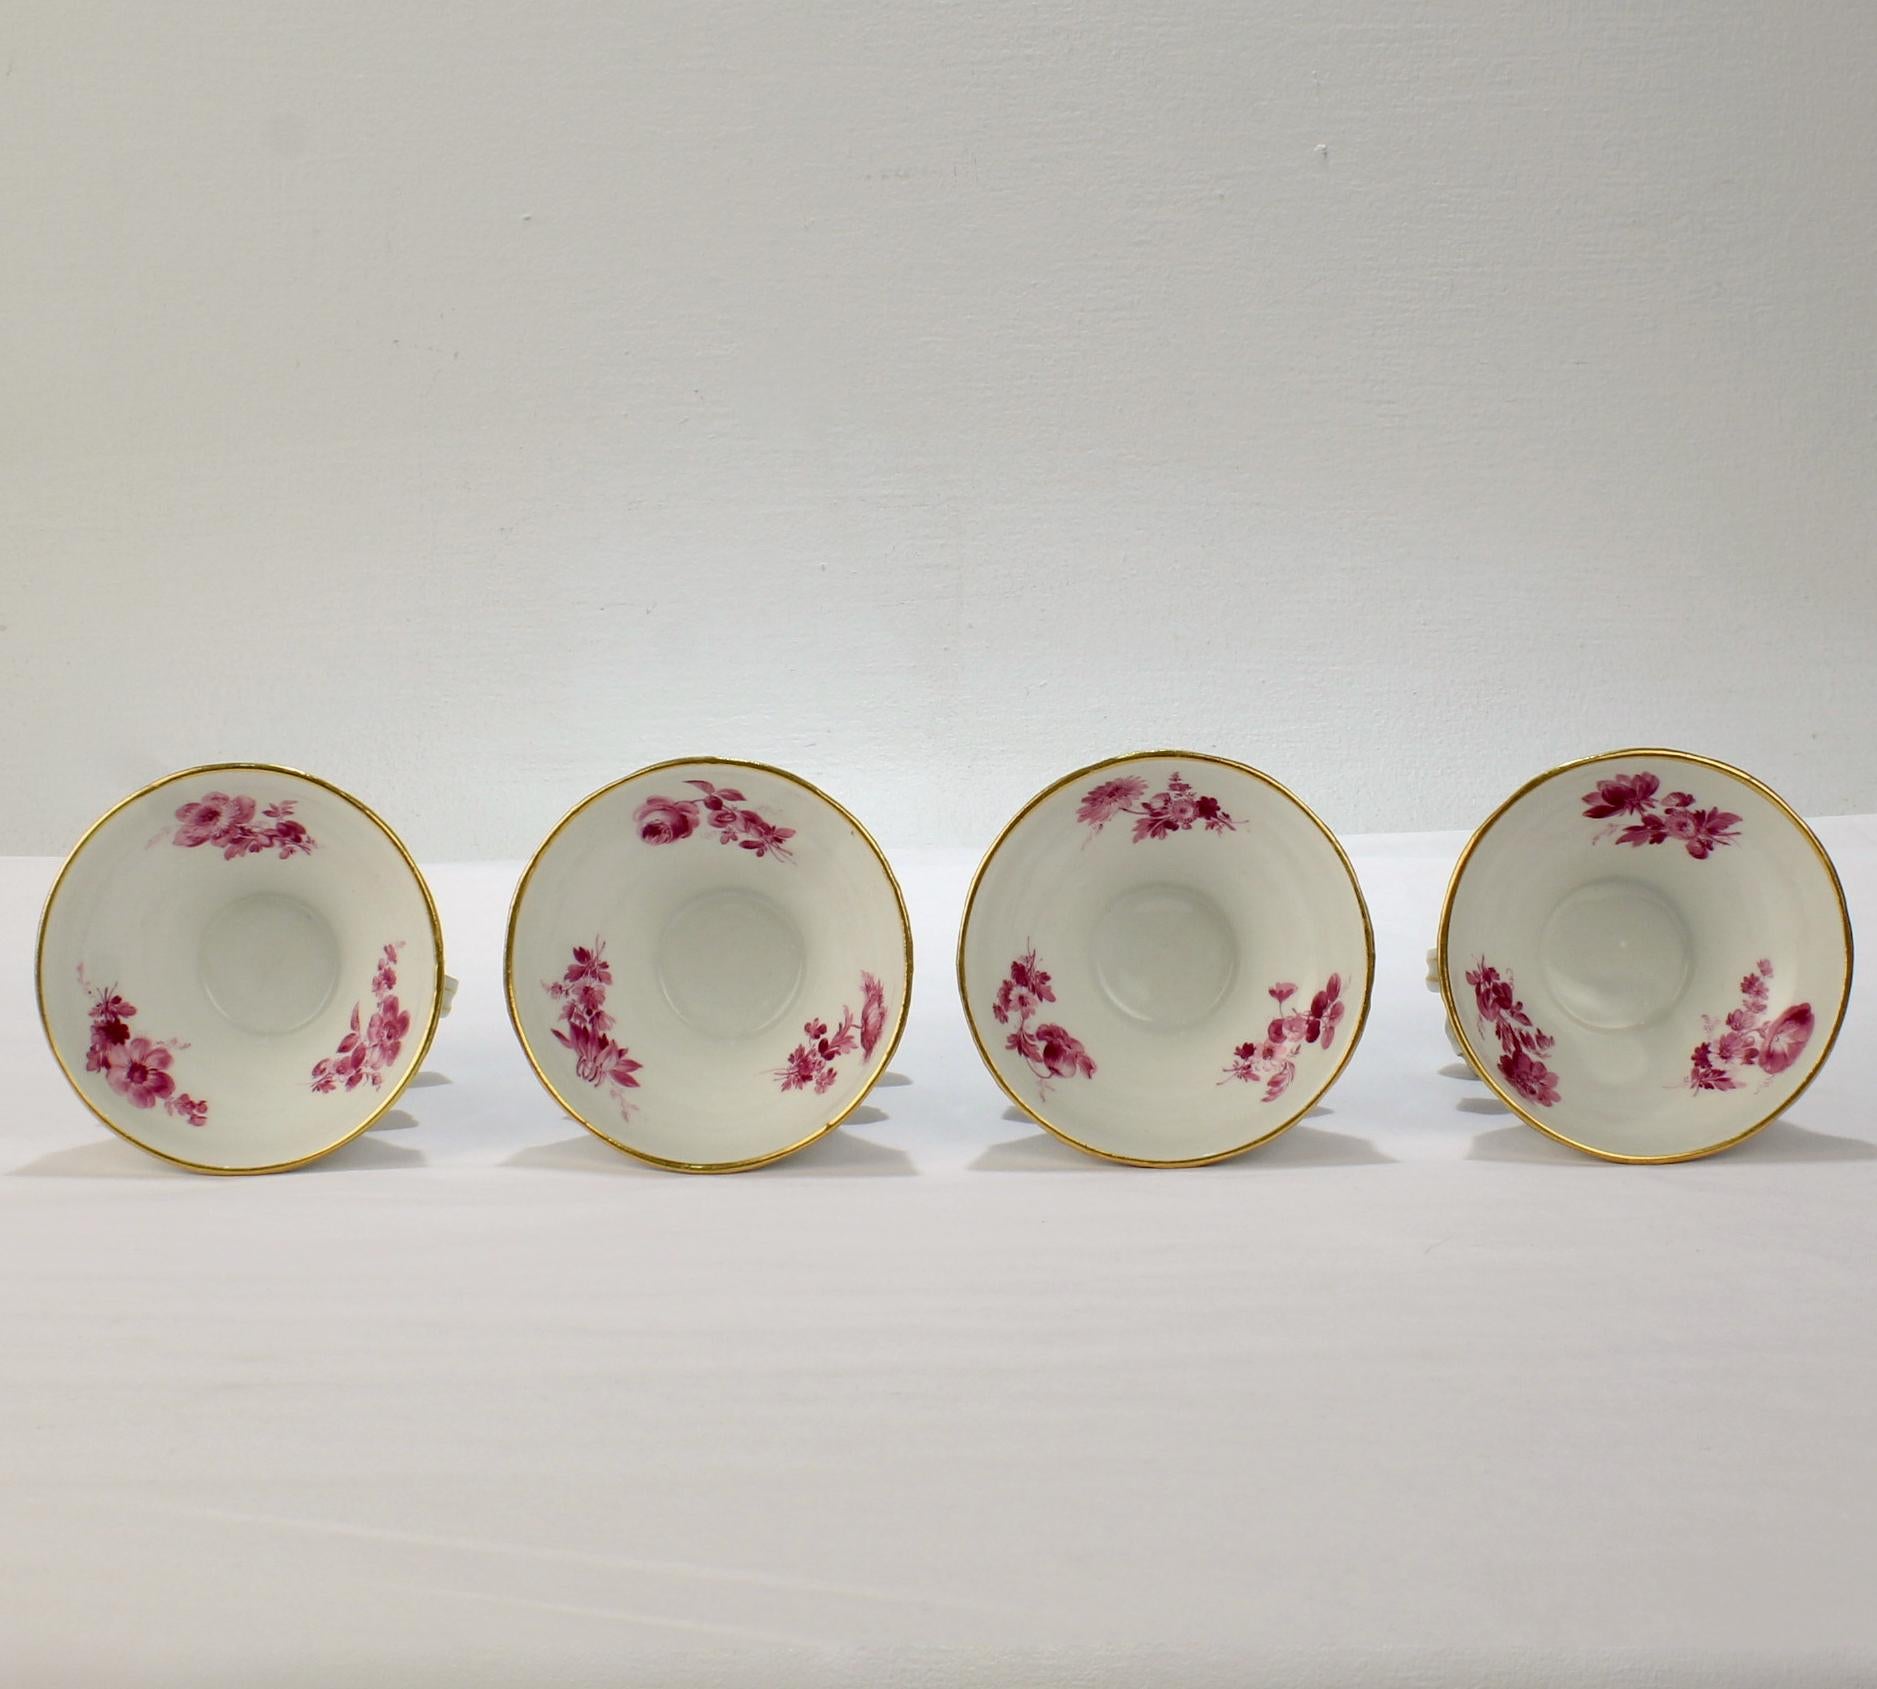 4 Antique Meissen Porcelain Footed Frauenkopf Salt Cellars with Puce Flowers In Good Condition For Sale In Philadelphia, PA